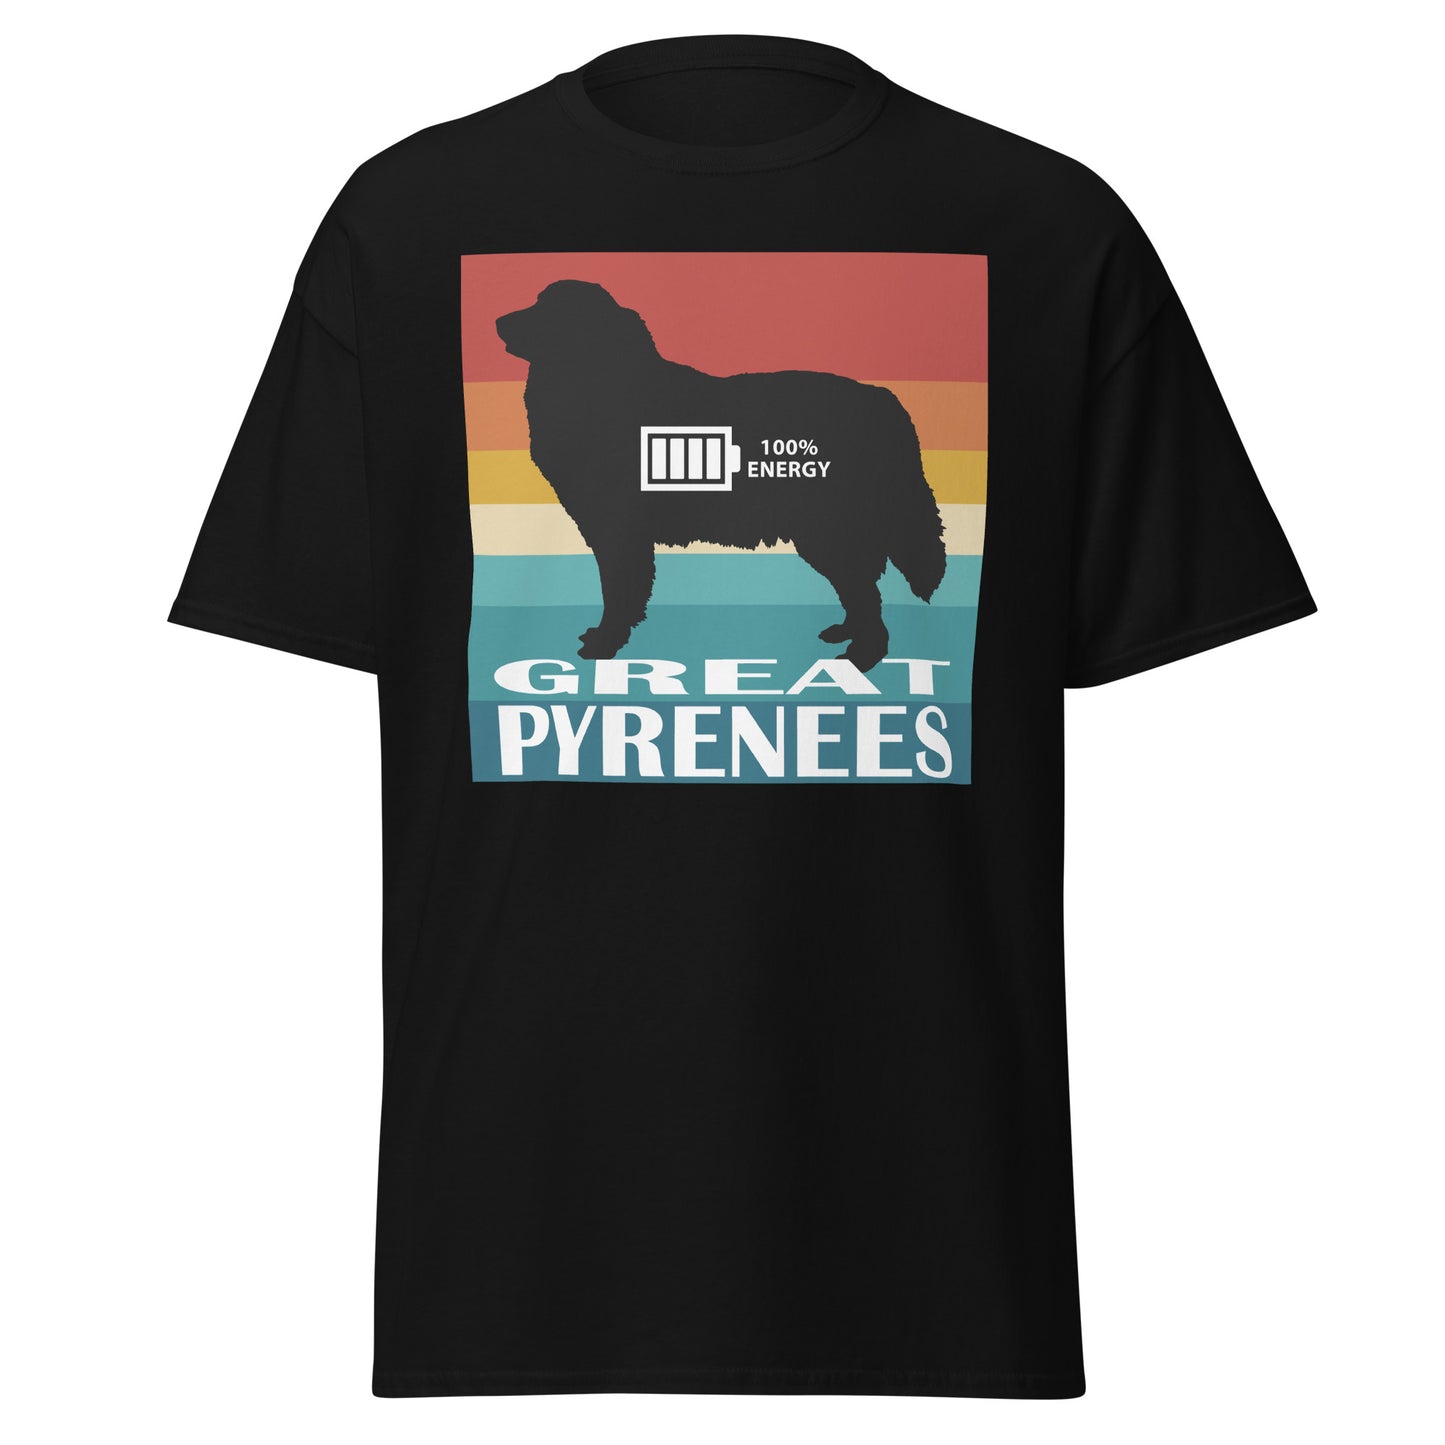 Great Pyrenees 100% Energy Men's classic tee by Dog Artistry